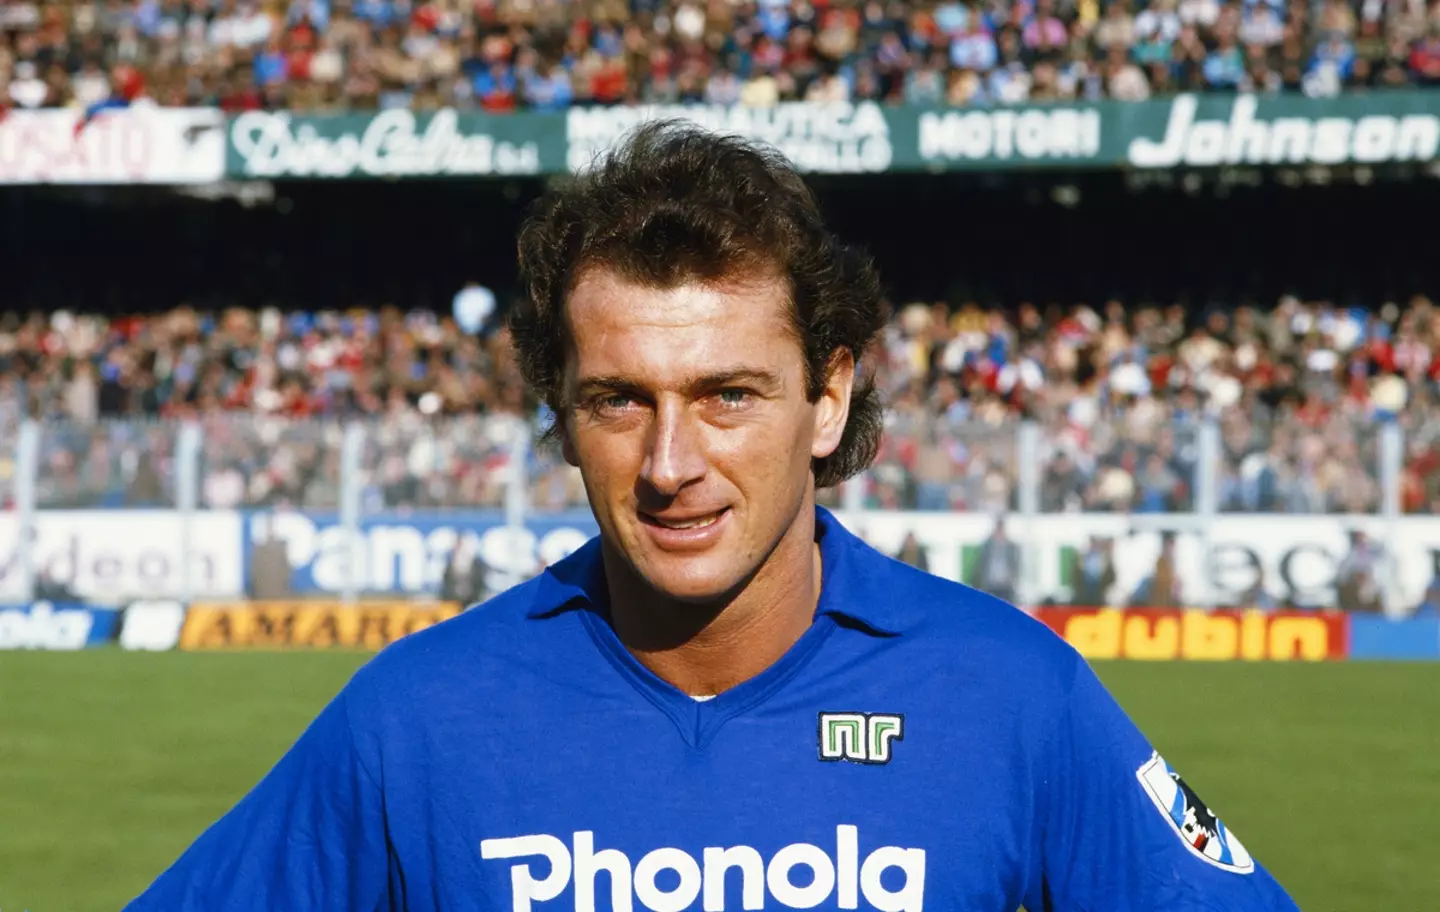 Trevor Francis has passed away at his home in Marbella, Spain.